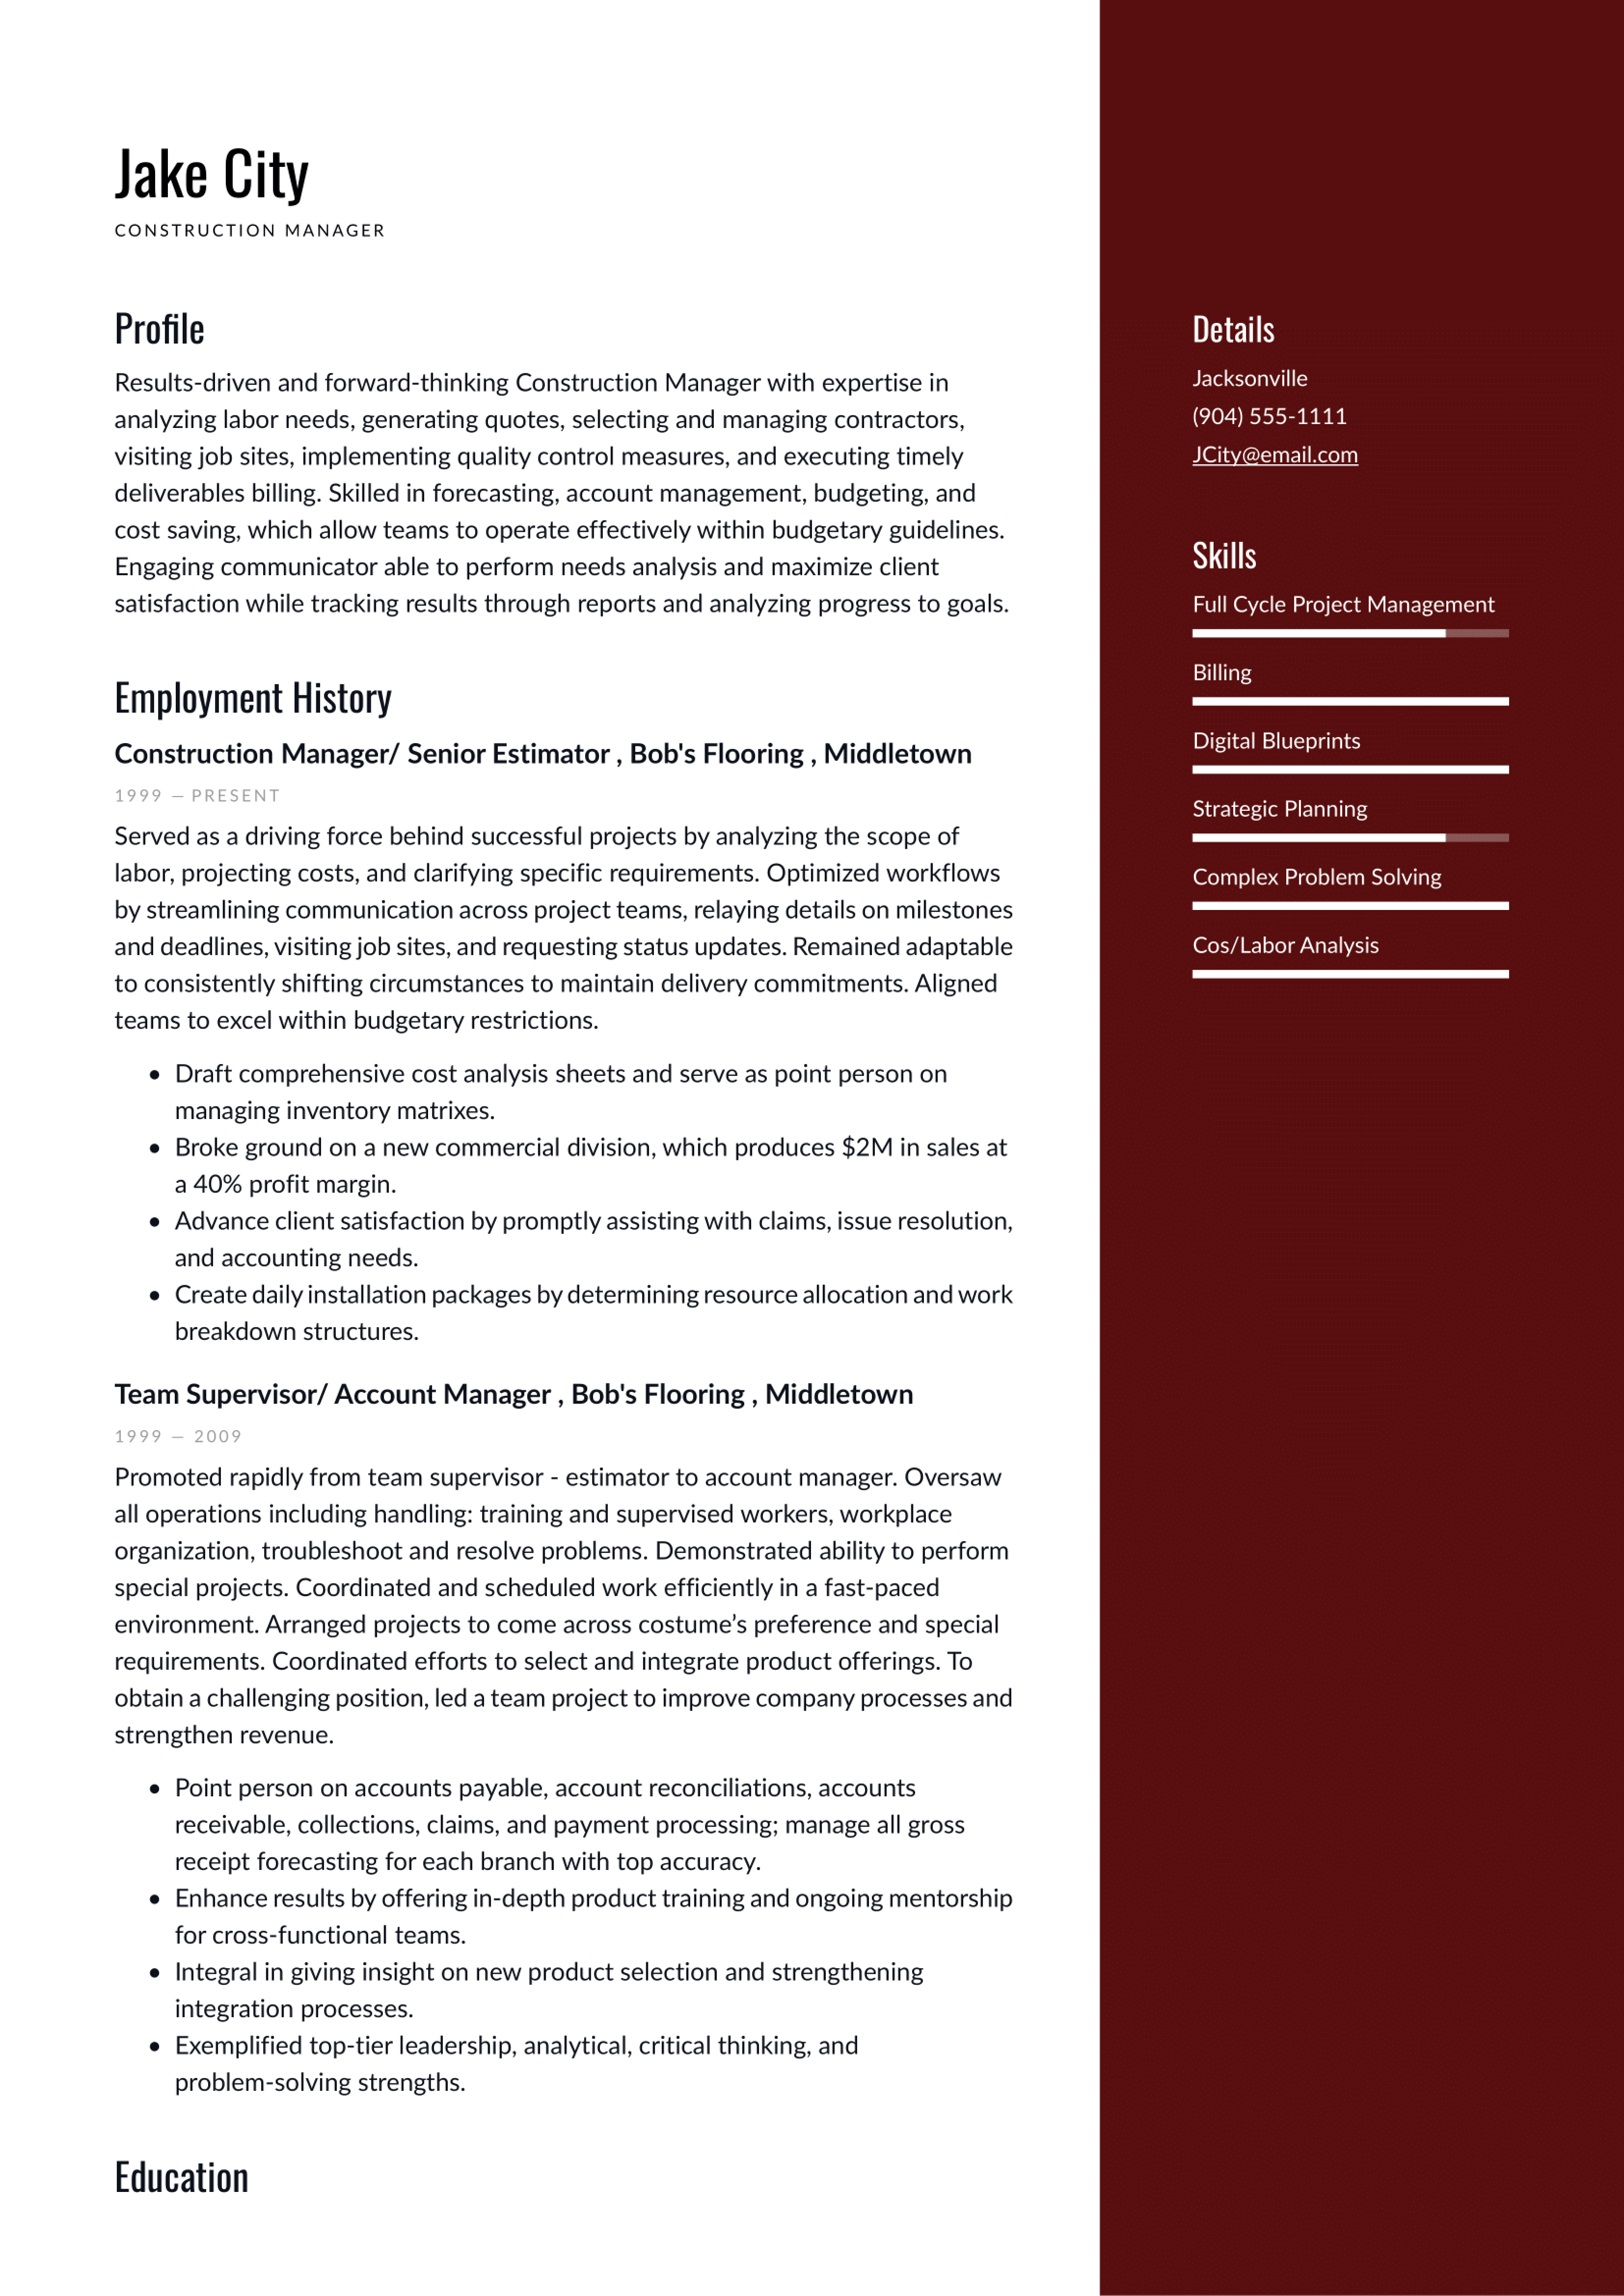 construction-manager-resume-example.png